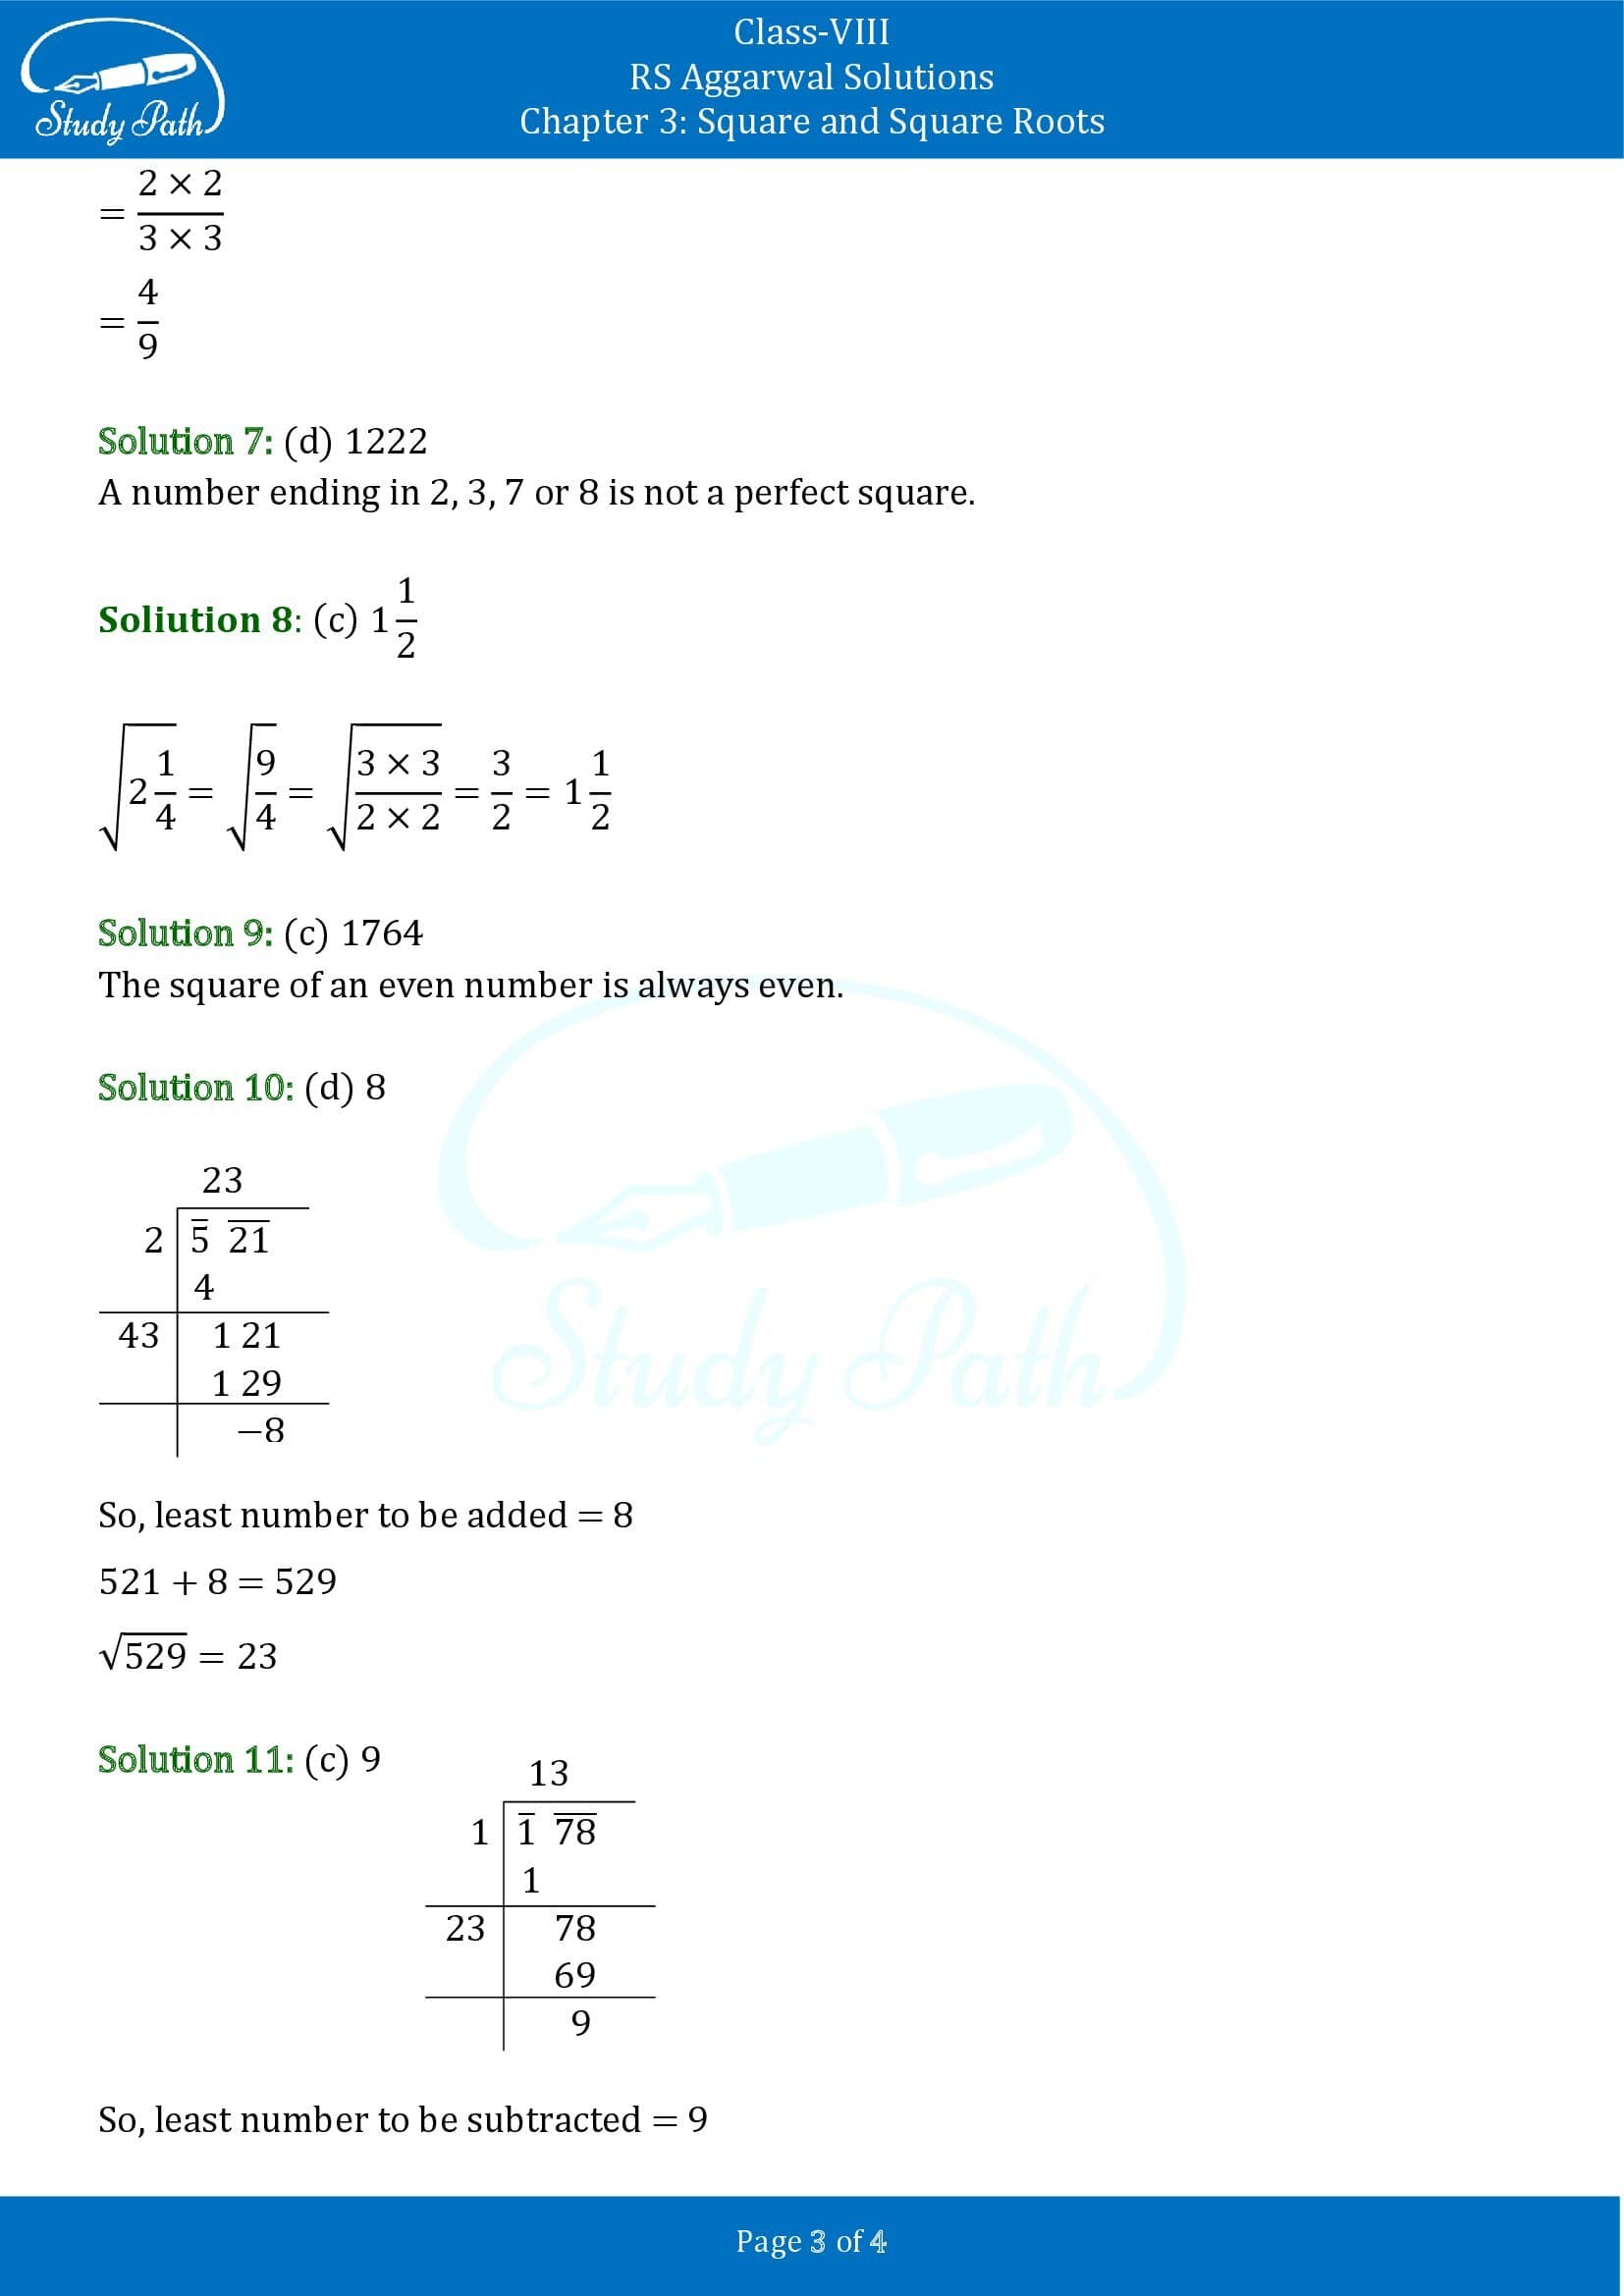 RS Aggarwal Solutions Class 8 Chapter 3 Square and Square Roots Test Paper 00003